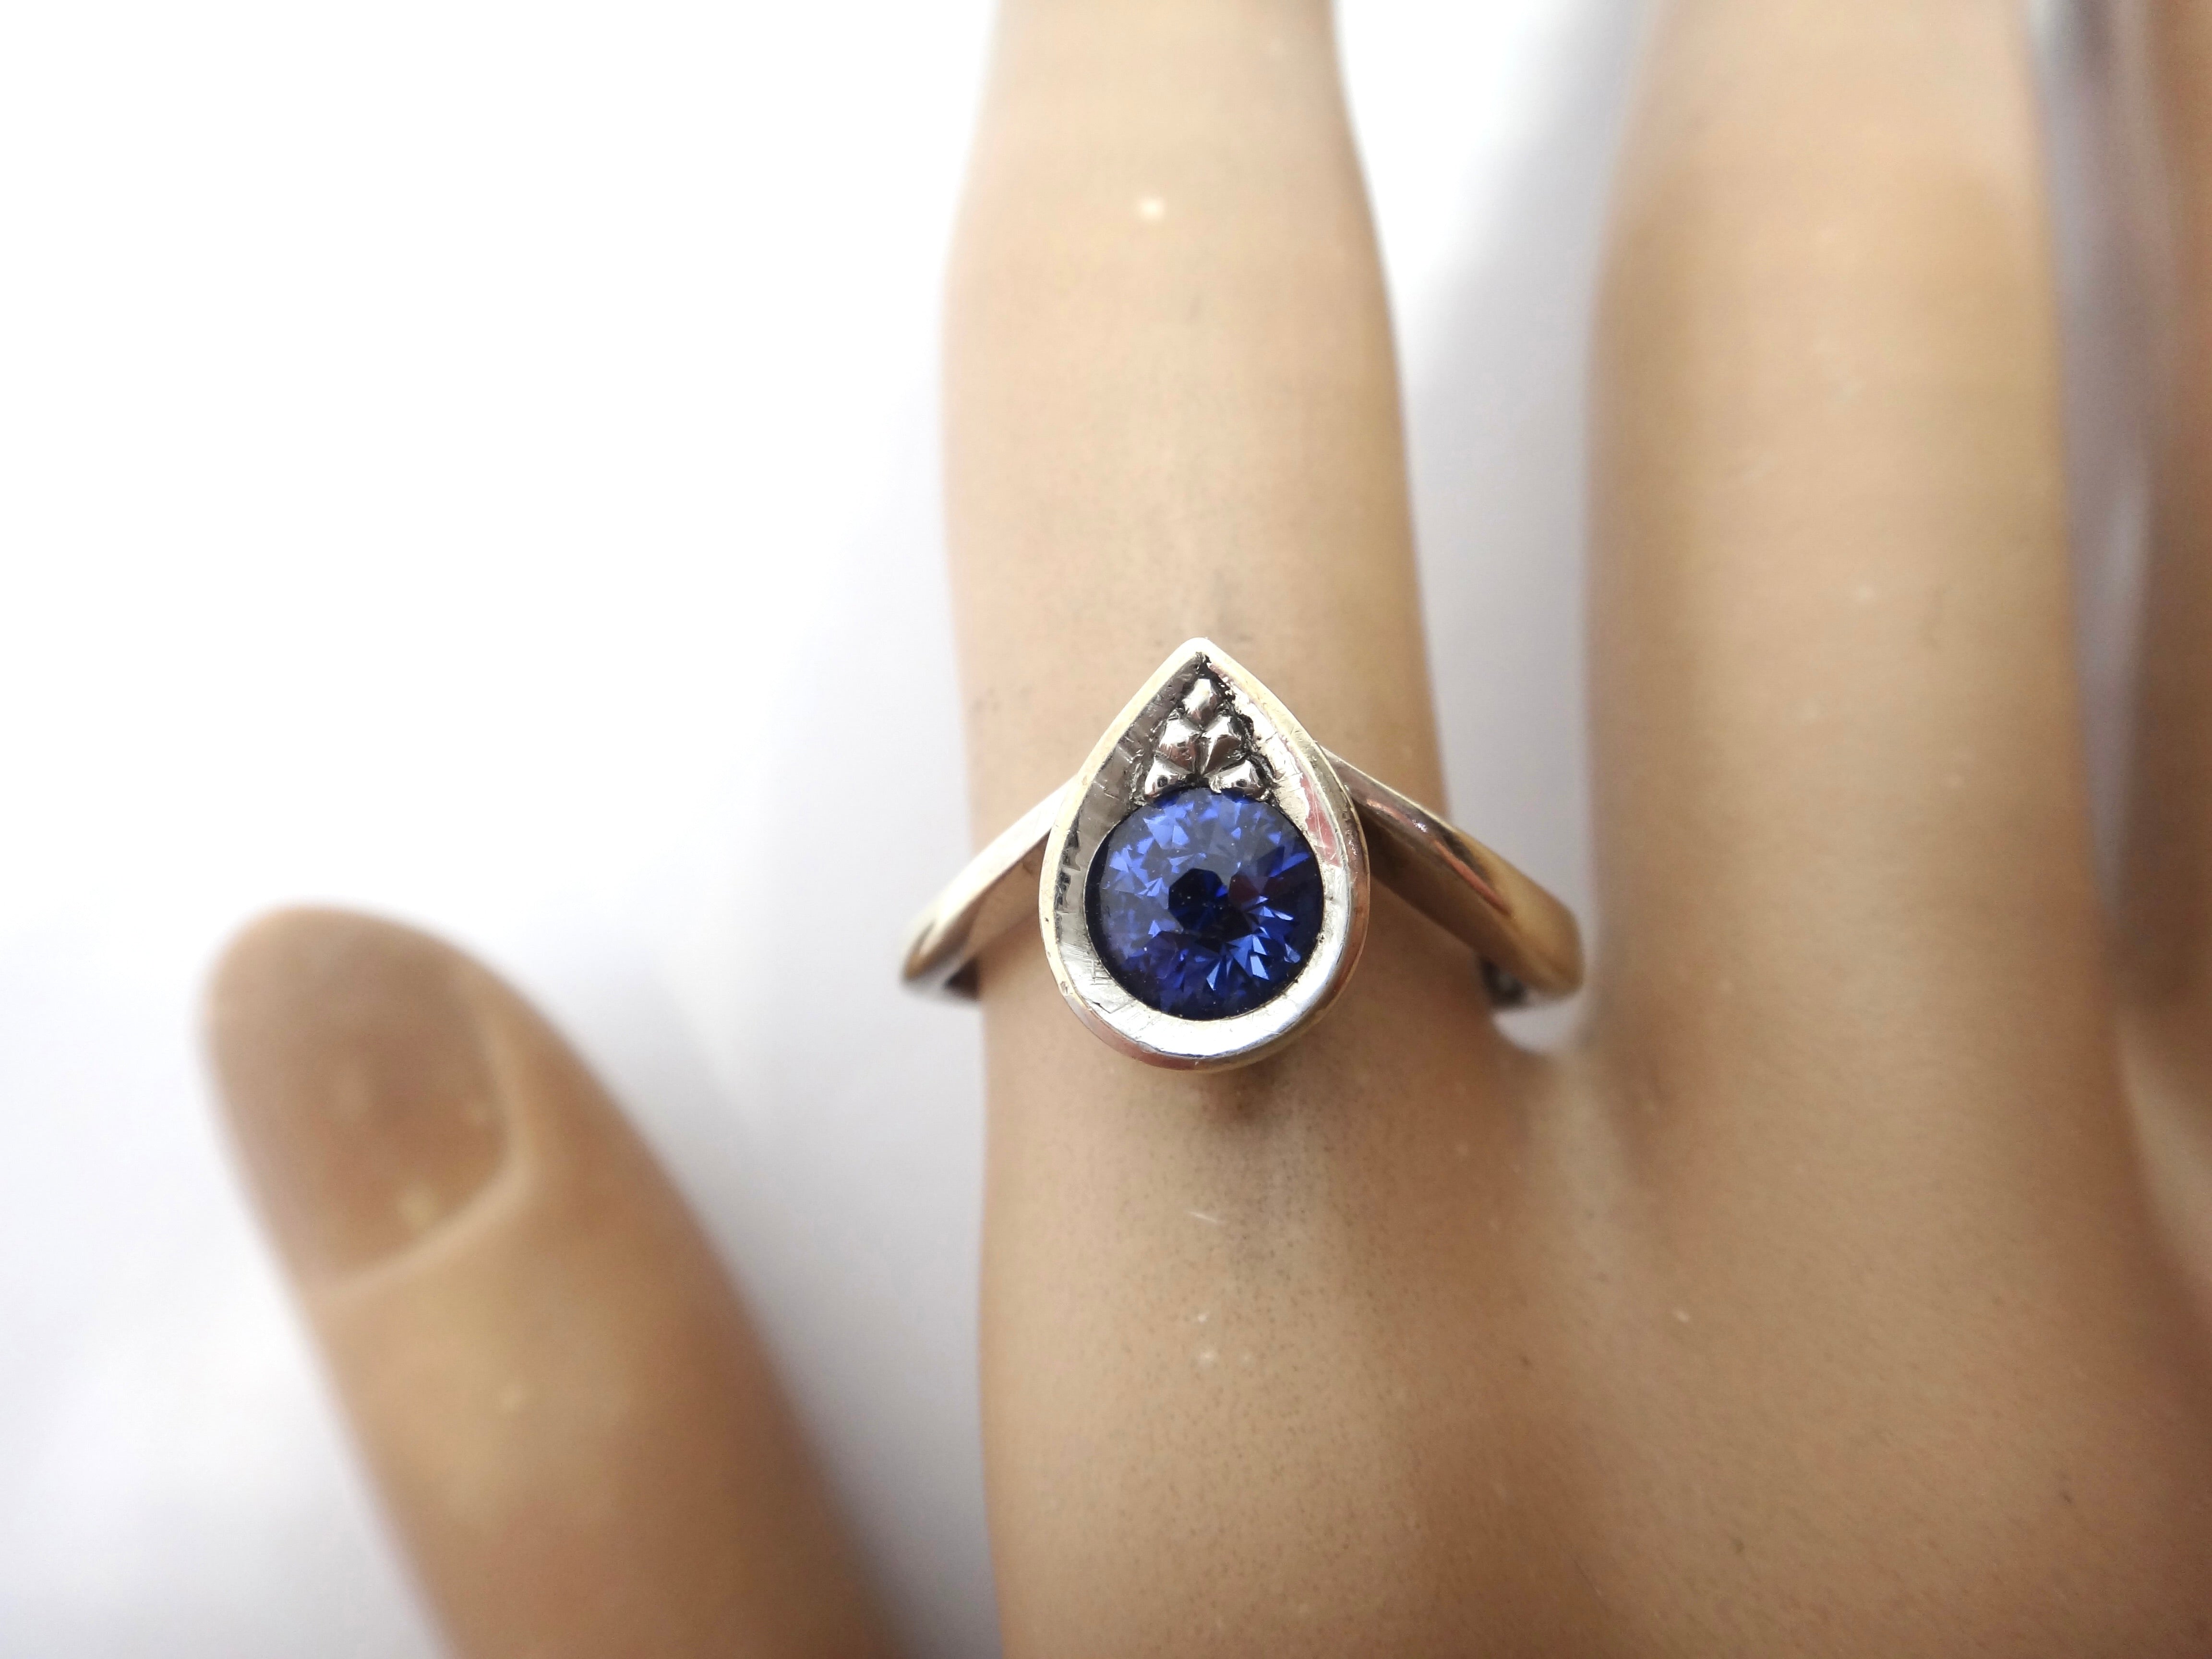 Handmade 9ct White GOLD & Sapphire, Pear Shaped Ring - VAL $4,430